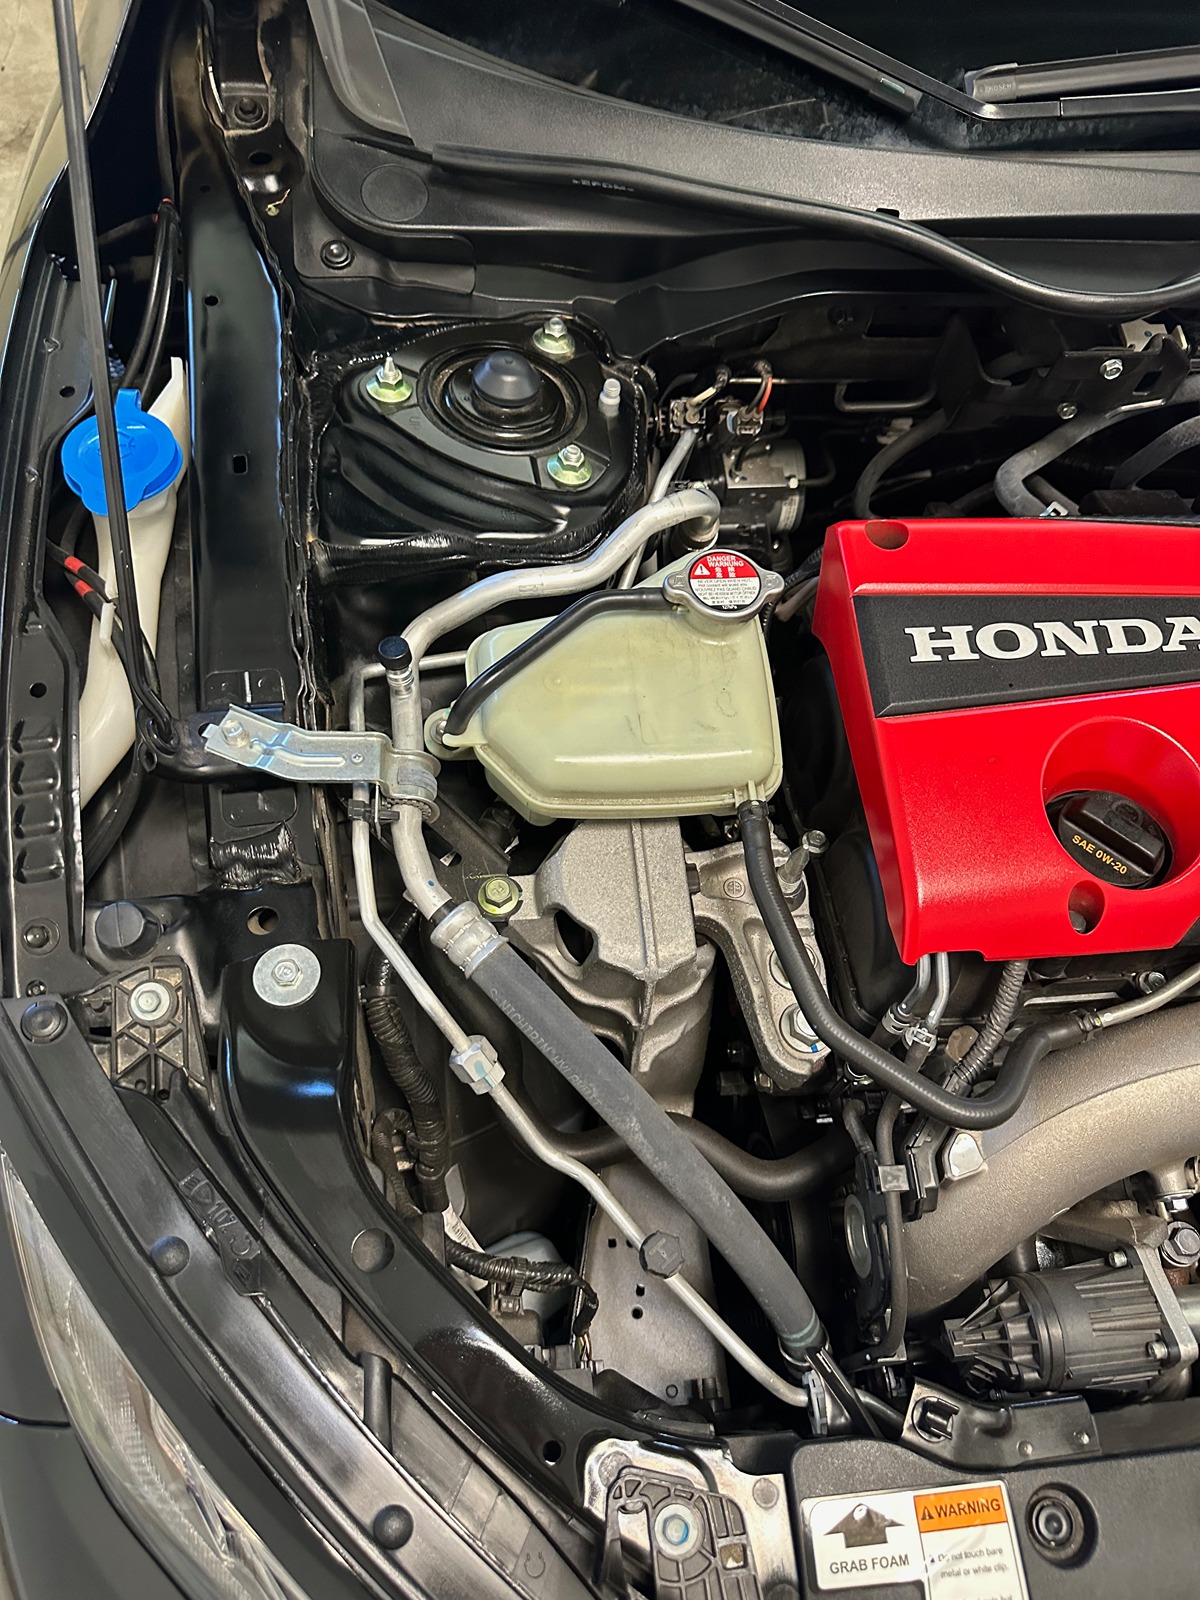 Honda Civic 10th gen Sold. 2019 Civic Type R for sale IMG_8207